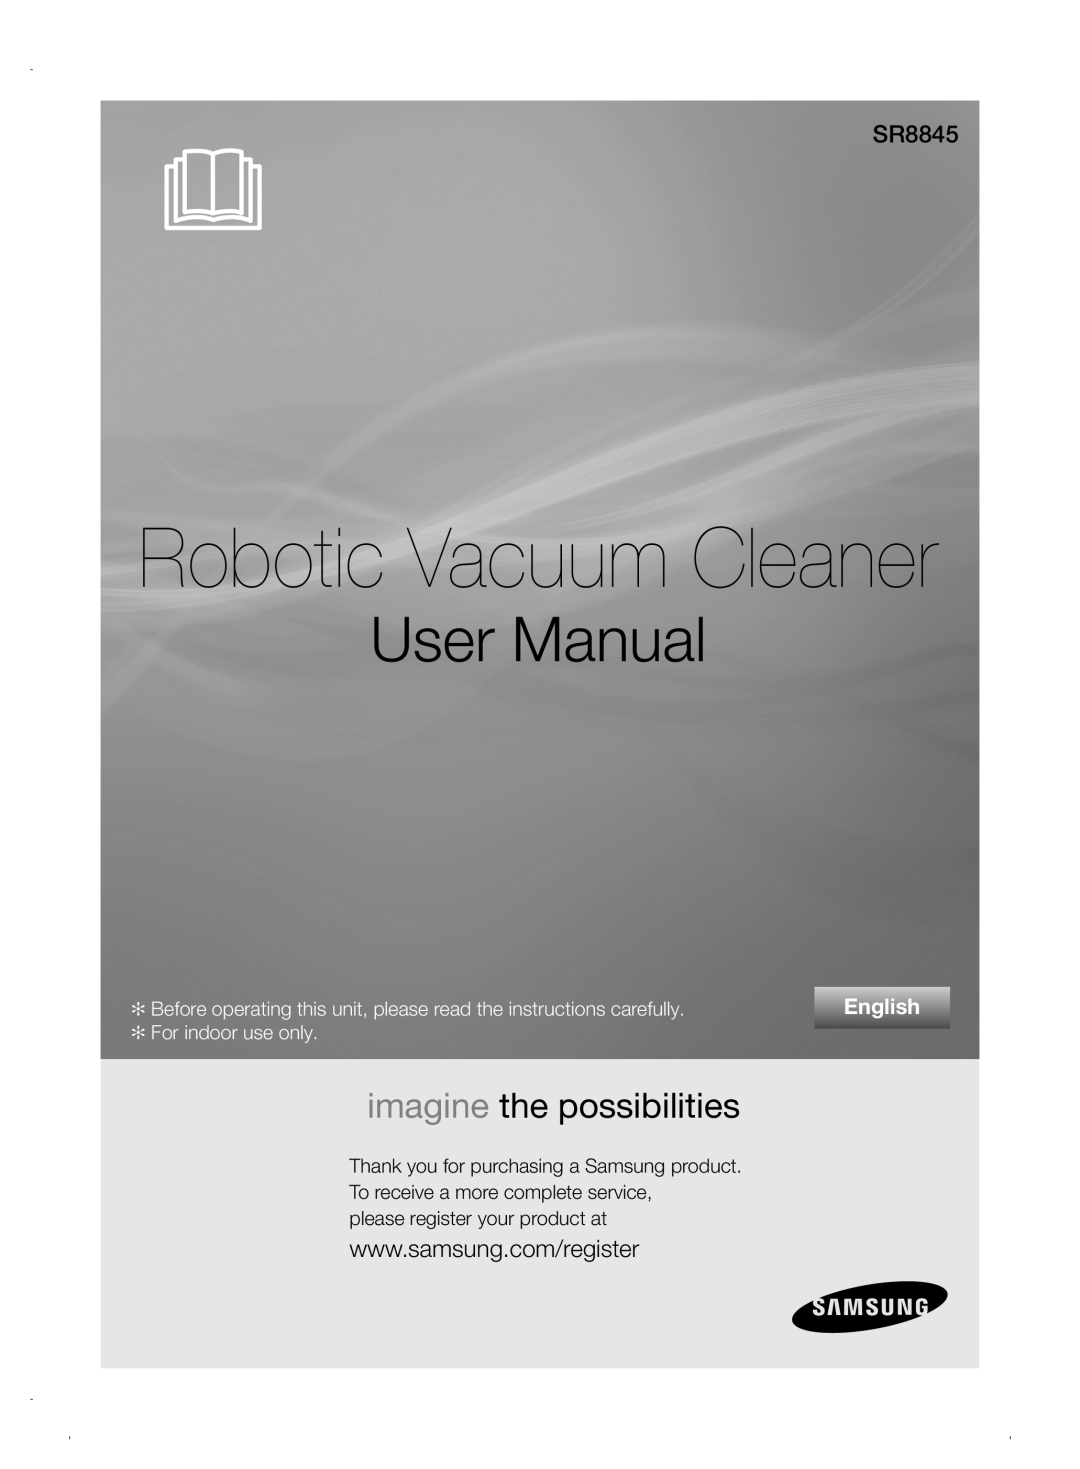 Samsung VCR8845T3A/XEF manual User Manual, imagine the possibilities, SR8845, English, Robotic Vacuum Cleaner 